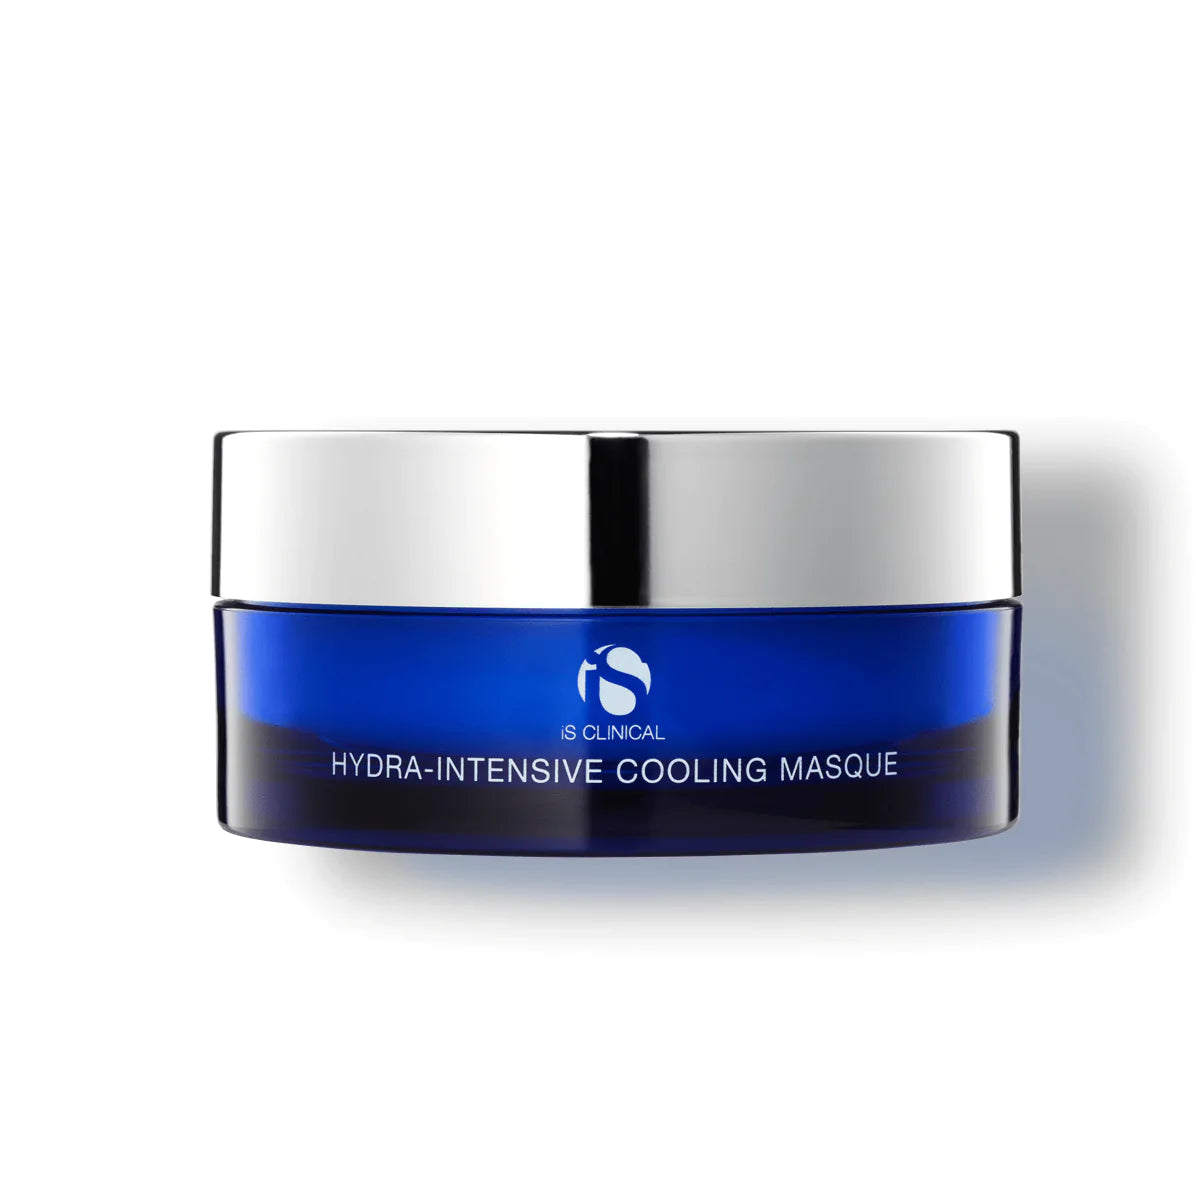 iS Clinical - Hydra-Intensive Cooling Masque